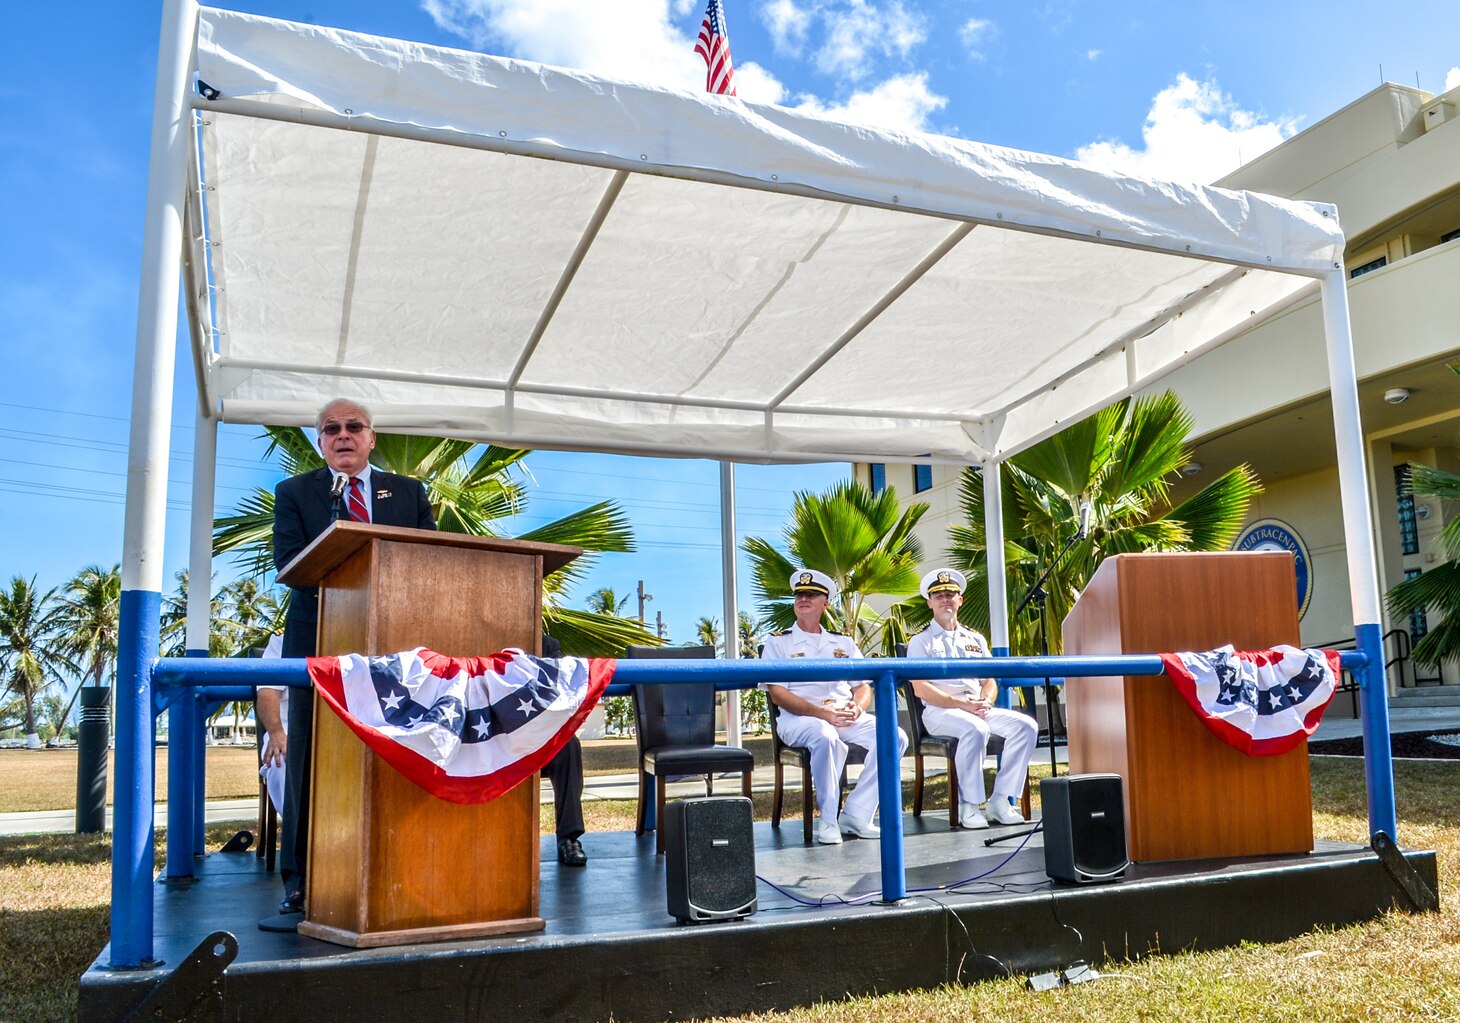 Retired Vice Adm. Albert Konetzni speaks about the lessons he's learned from his former colleagues as Pacific Fleet Force submarine commander during the Konetzni Hall building dedication ceremony held at Commander, Submarine Squadron 15 headquarters building. As the Pacific Fleet Force submarine commander, Konetzni spearheaded the squadron's reactivation in 2002, forward-deploying three Los Angeles-class fast attacksubmarines out of Guam.